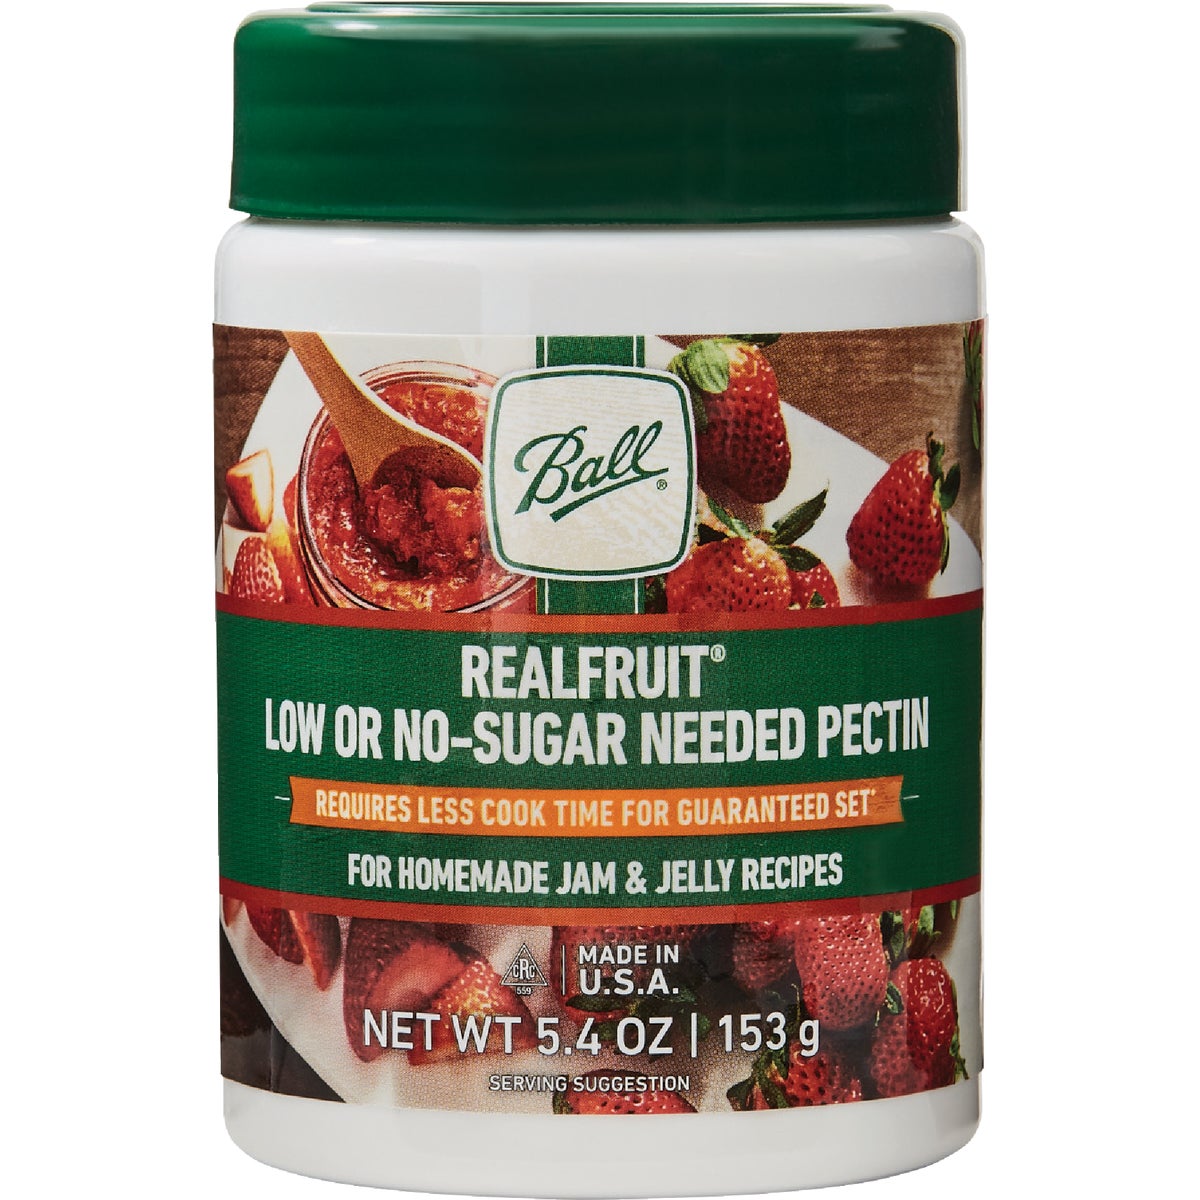 Item 625247, RealFruit is great for homemade jam and jelly recipes.